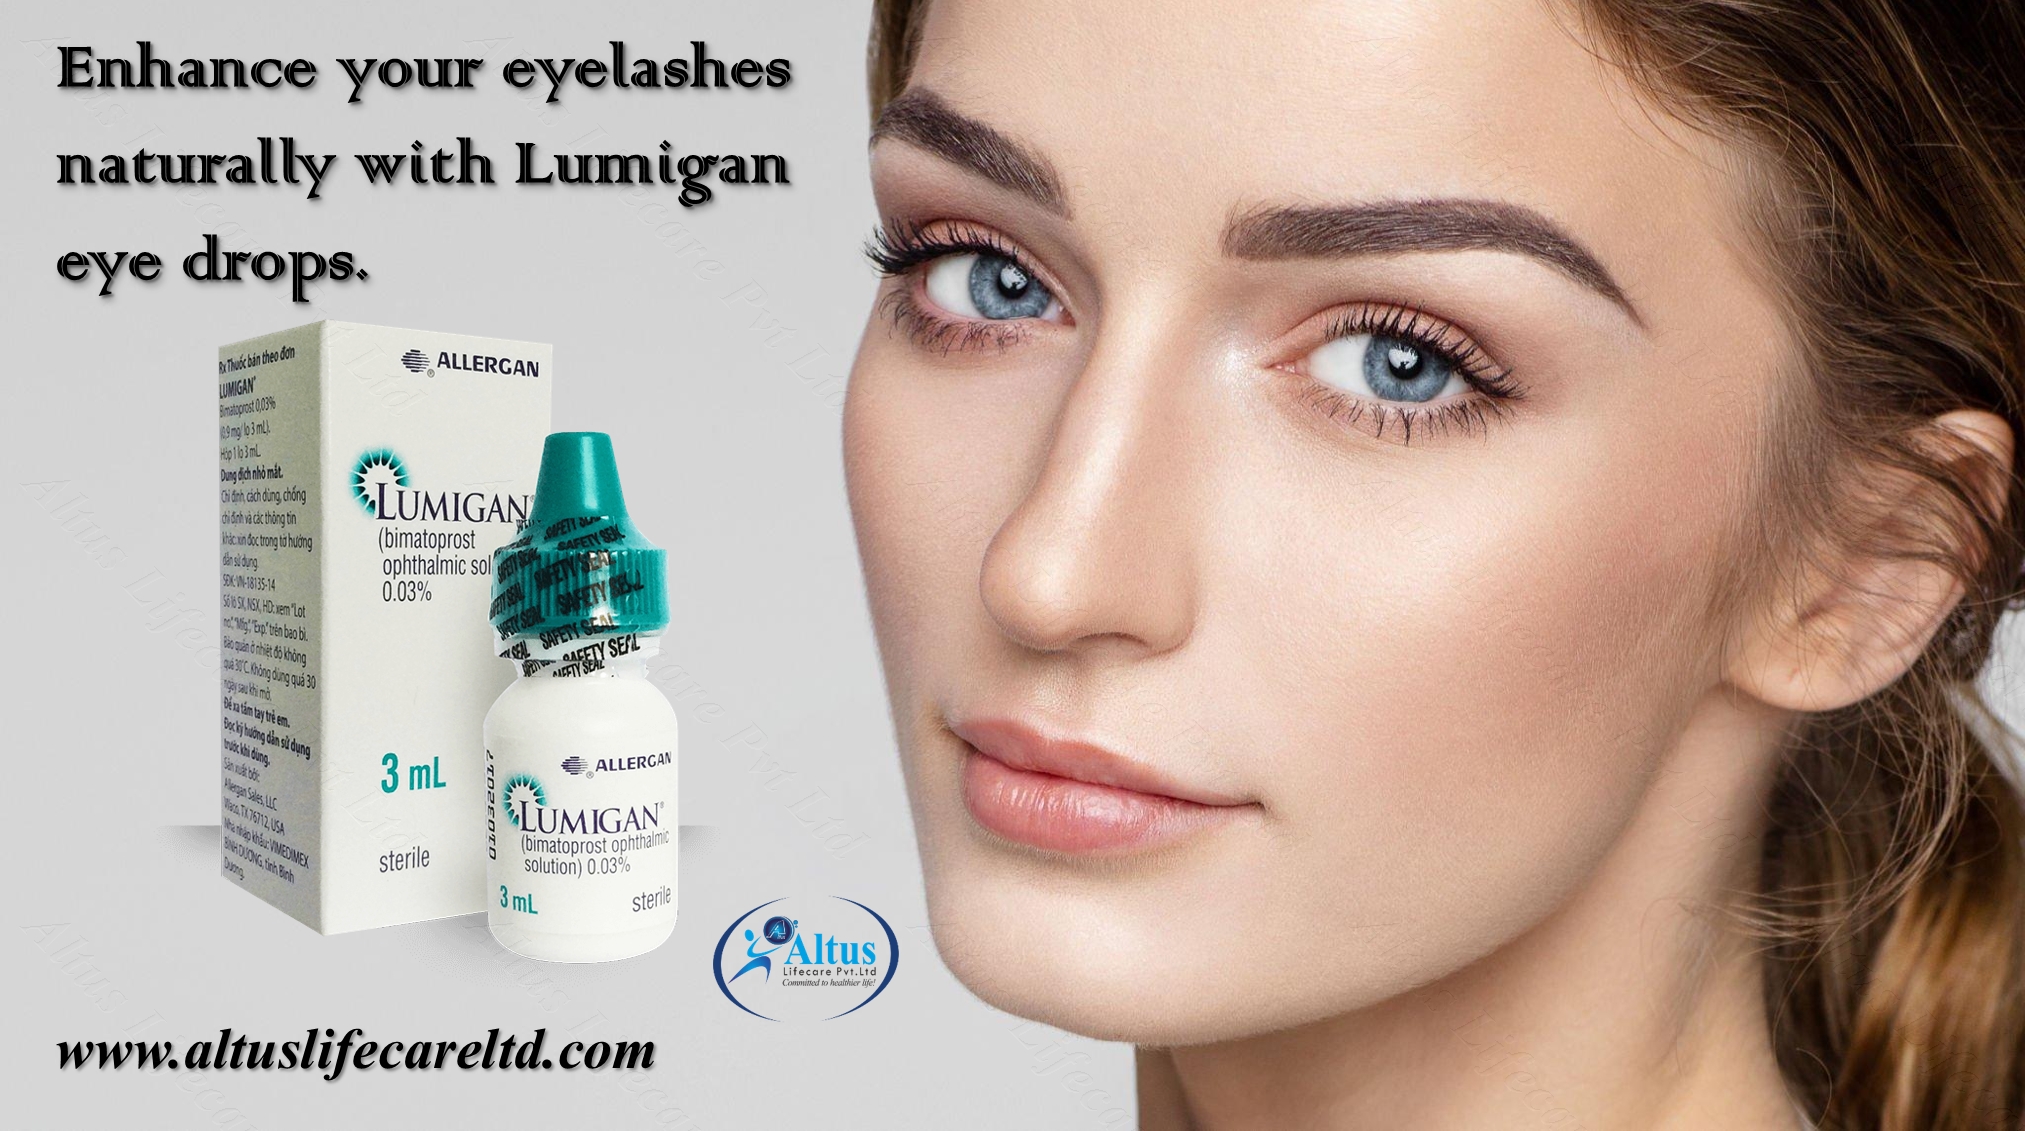 Celebrities' Choice: Lumigan Generic for Fuller, Thicker Lashes!